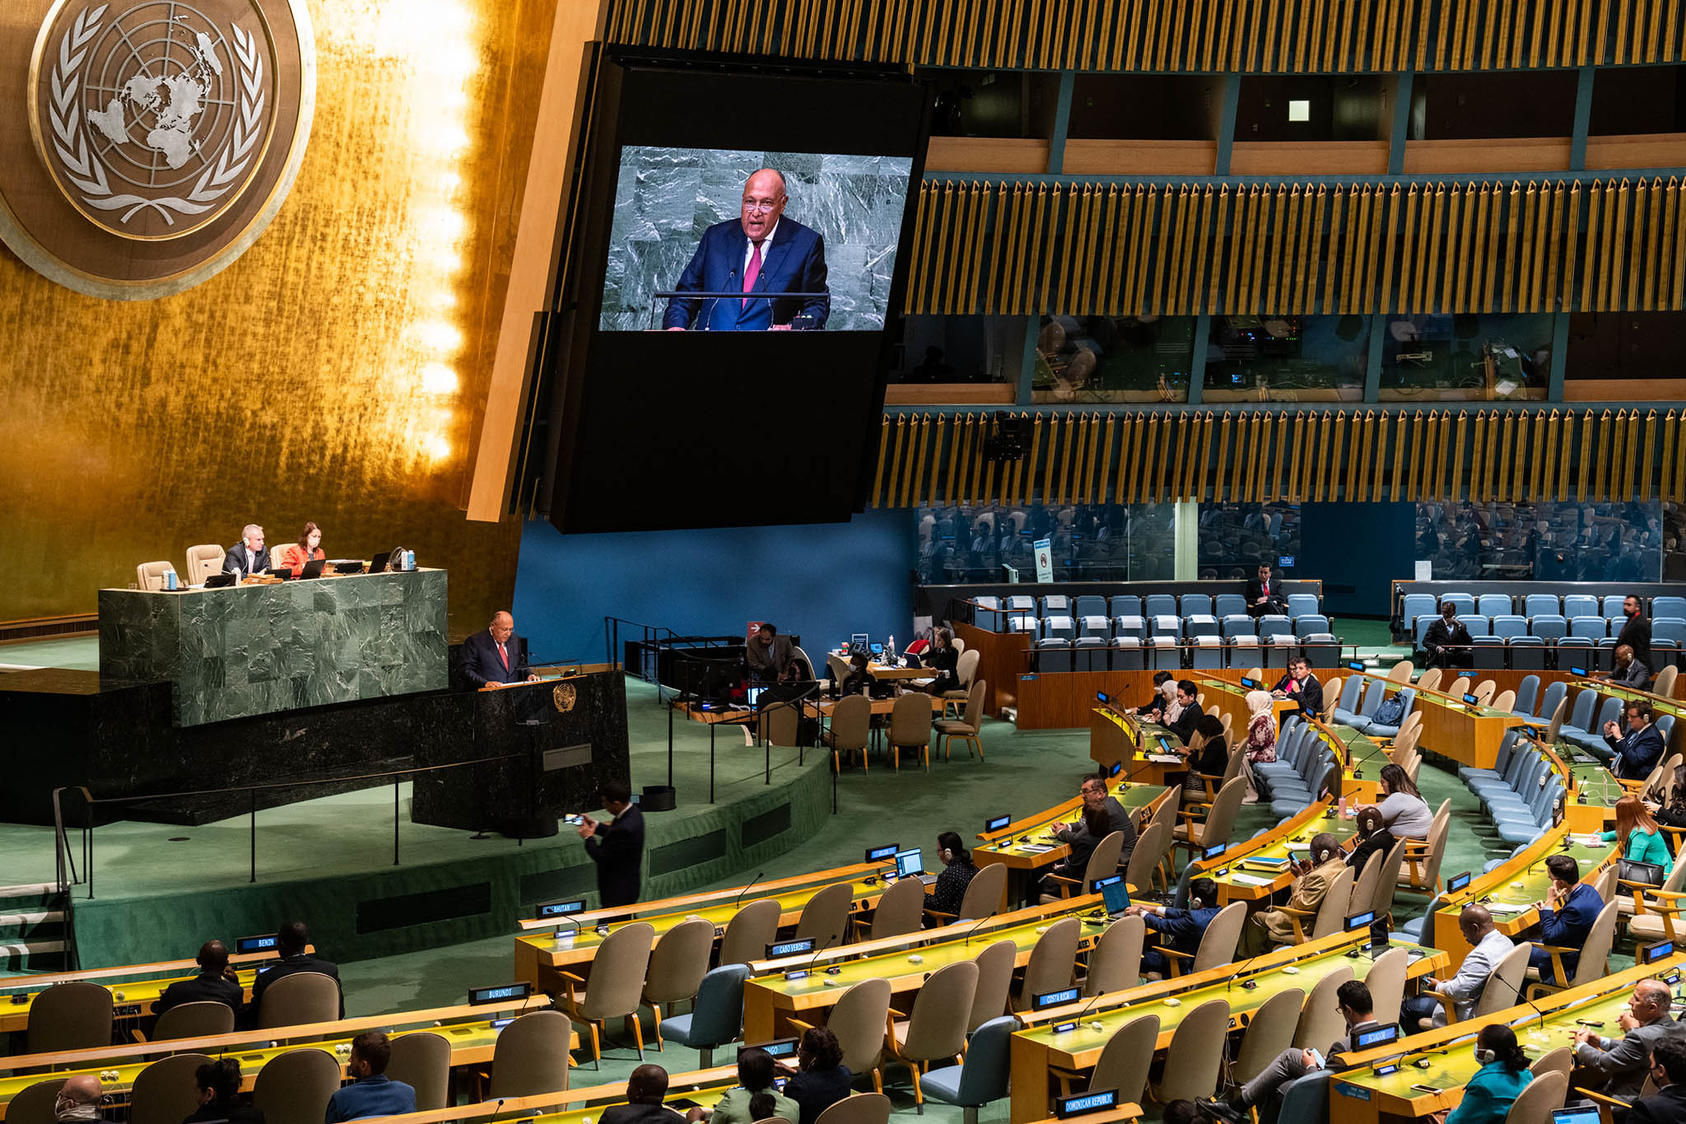 Egypt’s foreign minister delivers remarks at the U.N. General Assembly, Sept. 24, 2022. Nonaligned countries like Egypt have been reluctant to “take sides” between Russia and the West regarding the war in Ukraine. (Haiyun Jiang/The New York Times)